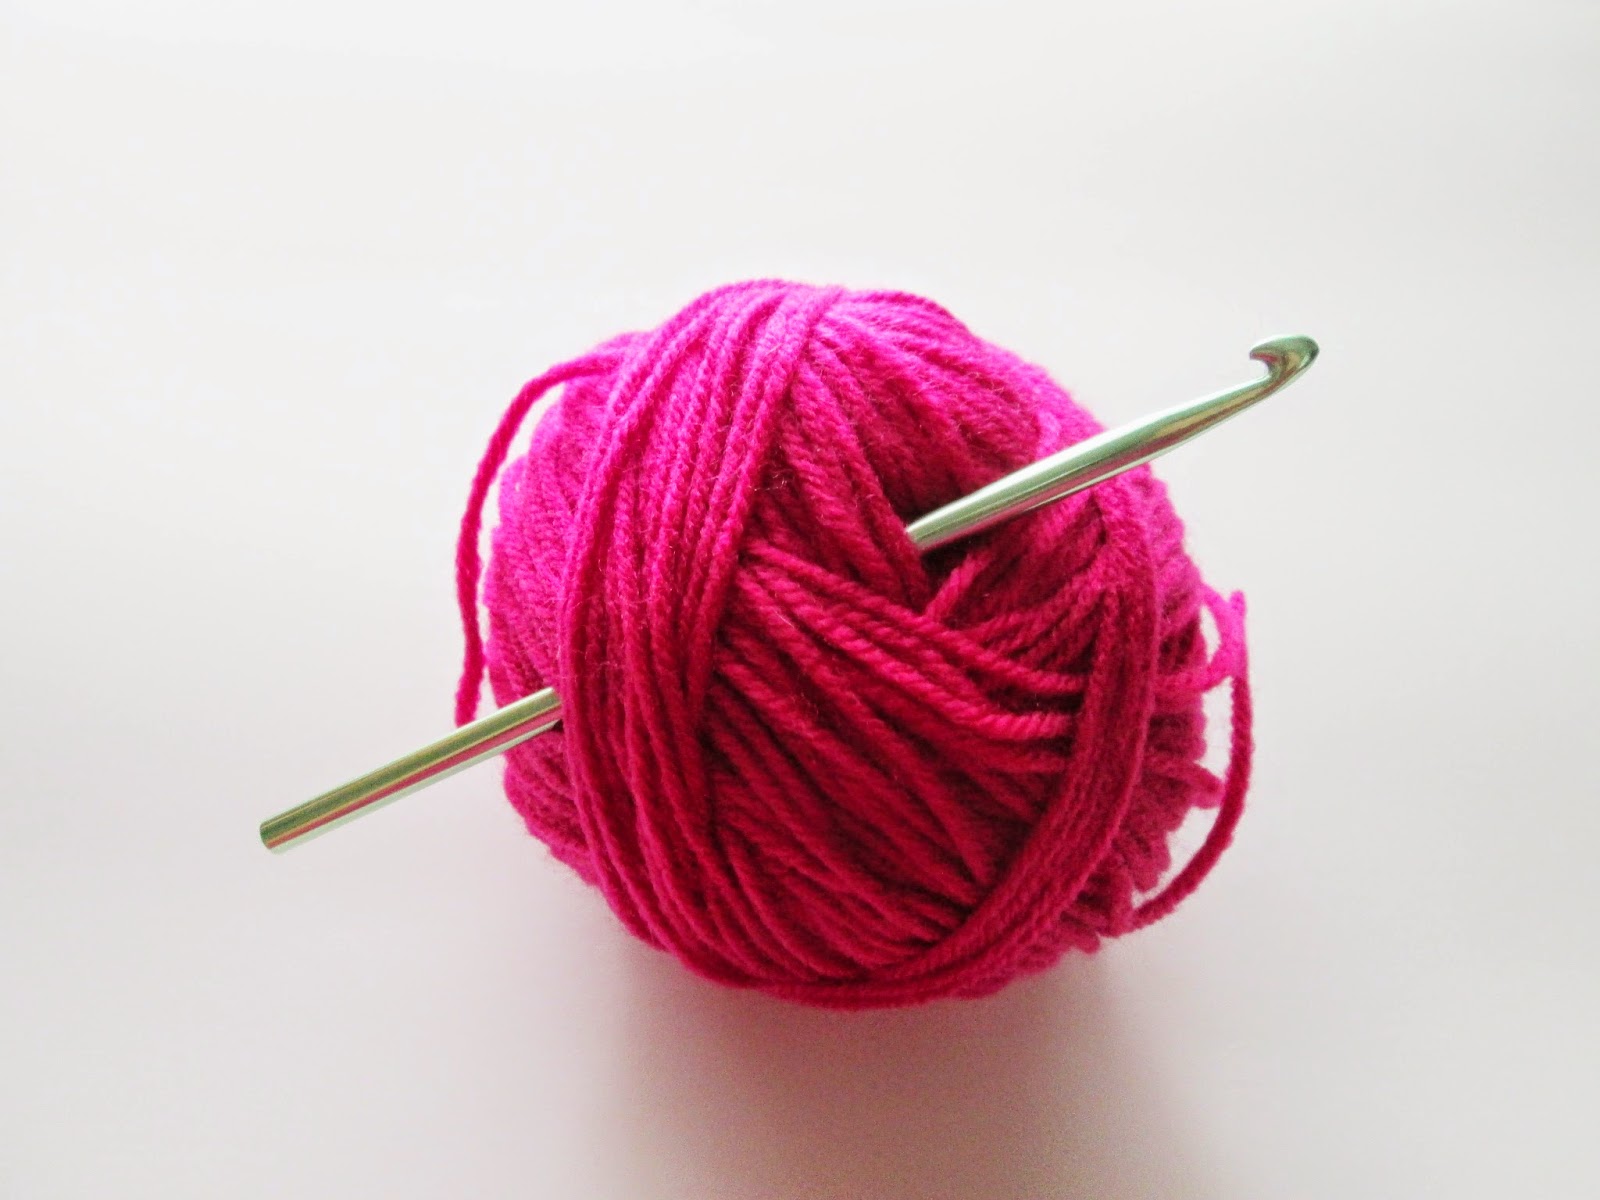 RML Resources: How to Crochet.